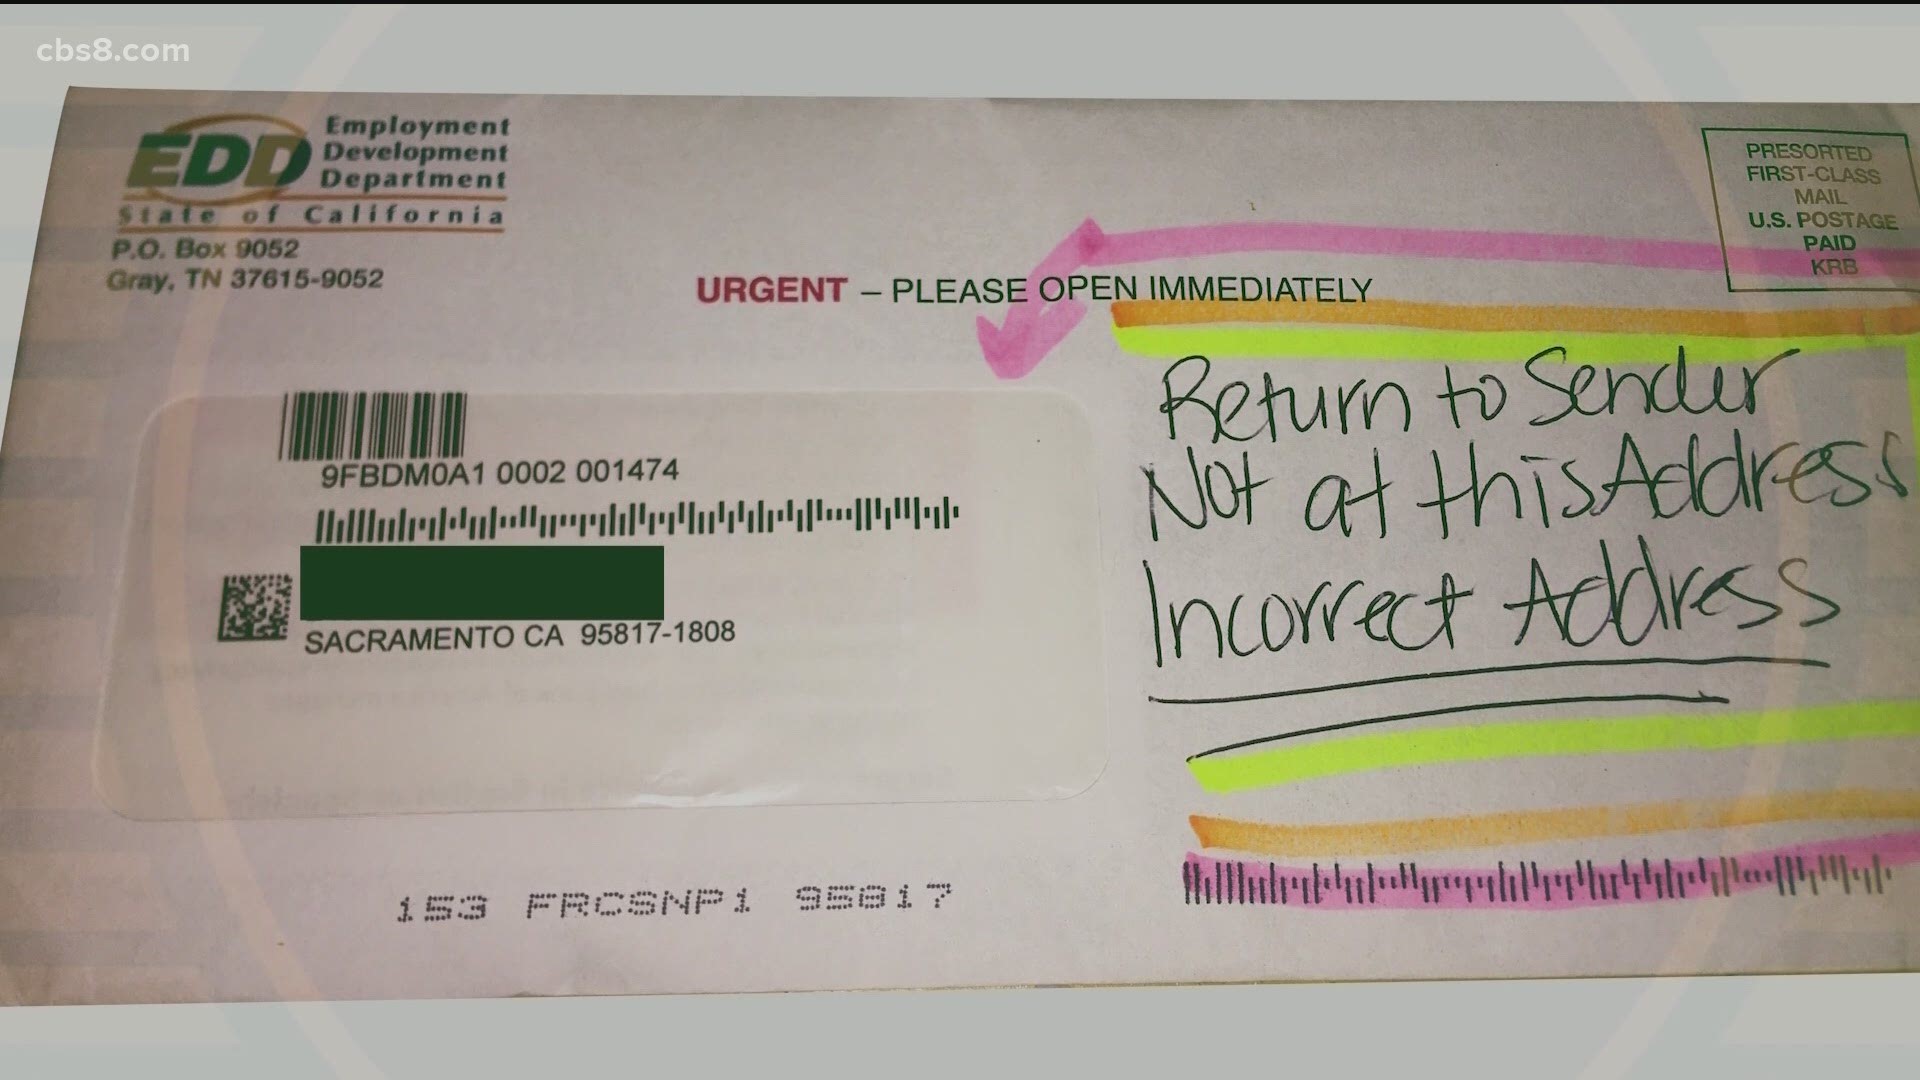 Why Are Edd Letters With Debit Cards Sent To Wrong Addresses Cbs8 Com